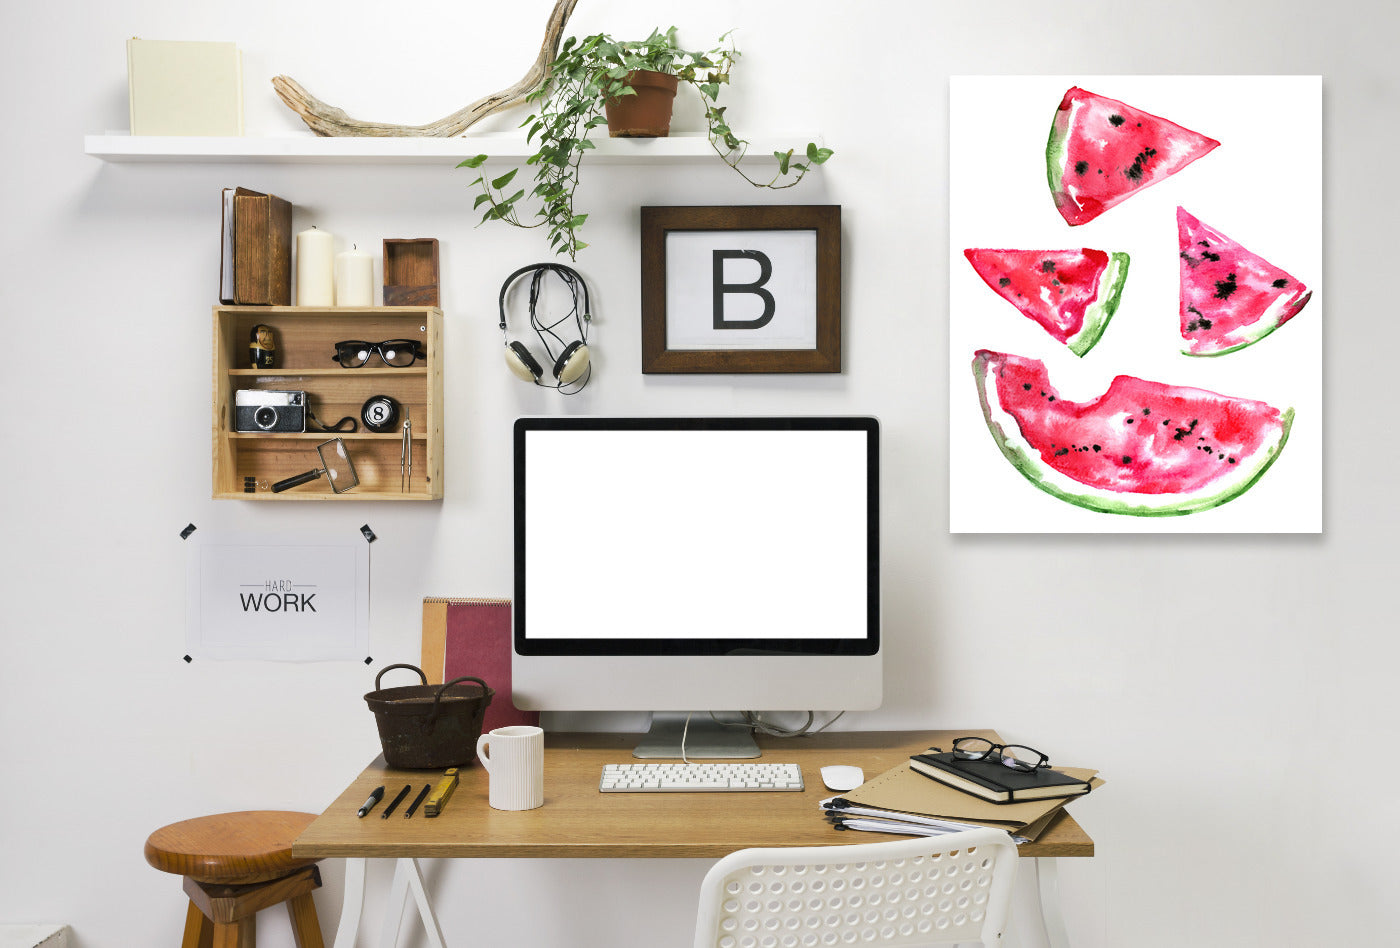 Watermelon Slice by Sam Nagel Wrapped Canvas - Wrapped Canvas - Americanflat